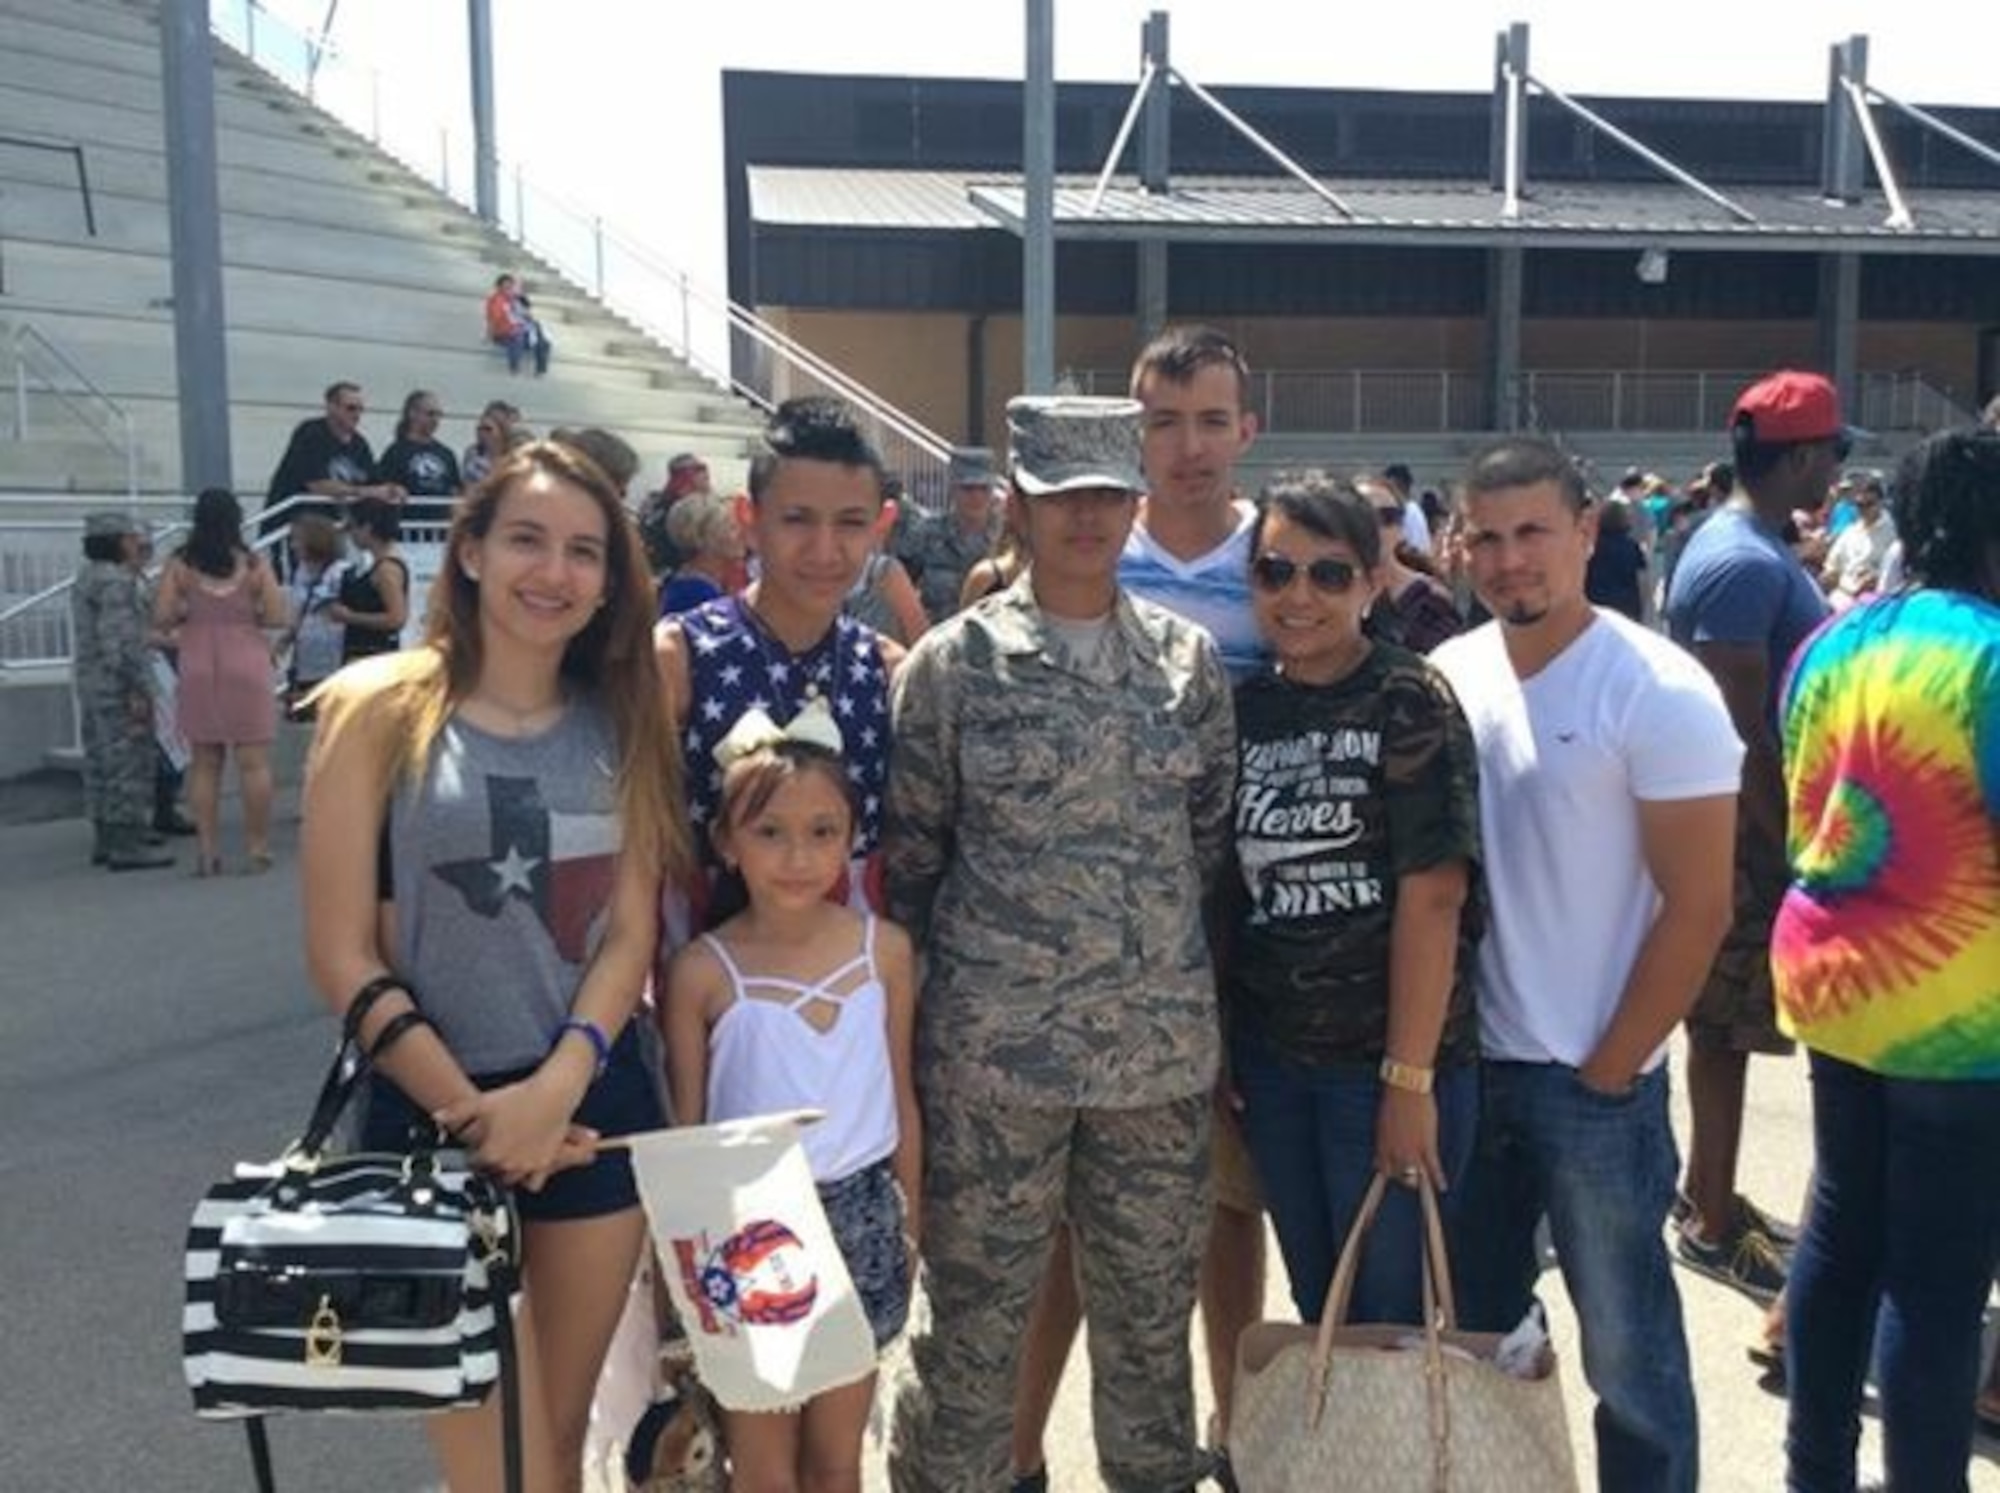 U.S. Air Force Airman 1st Class Alicia “Alice” Contreras, 7th Bomb Wing paralegal, with her family upon her basic military training graduation July 19, 2015, at Lackland Air Force Base, Texas. Contreras joined the U.S. Air Force with the promise that she would be able to gain U.S. citizenship. After being assigned to Dyess Air Force Base Oct. 15, 2015, she was able to start the process and finally took the oath of citizenship Feb. 7, 2017. (Courtesy photo)